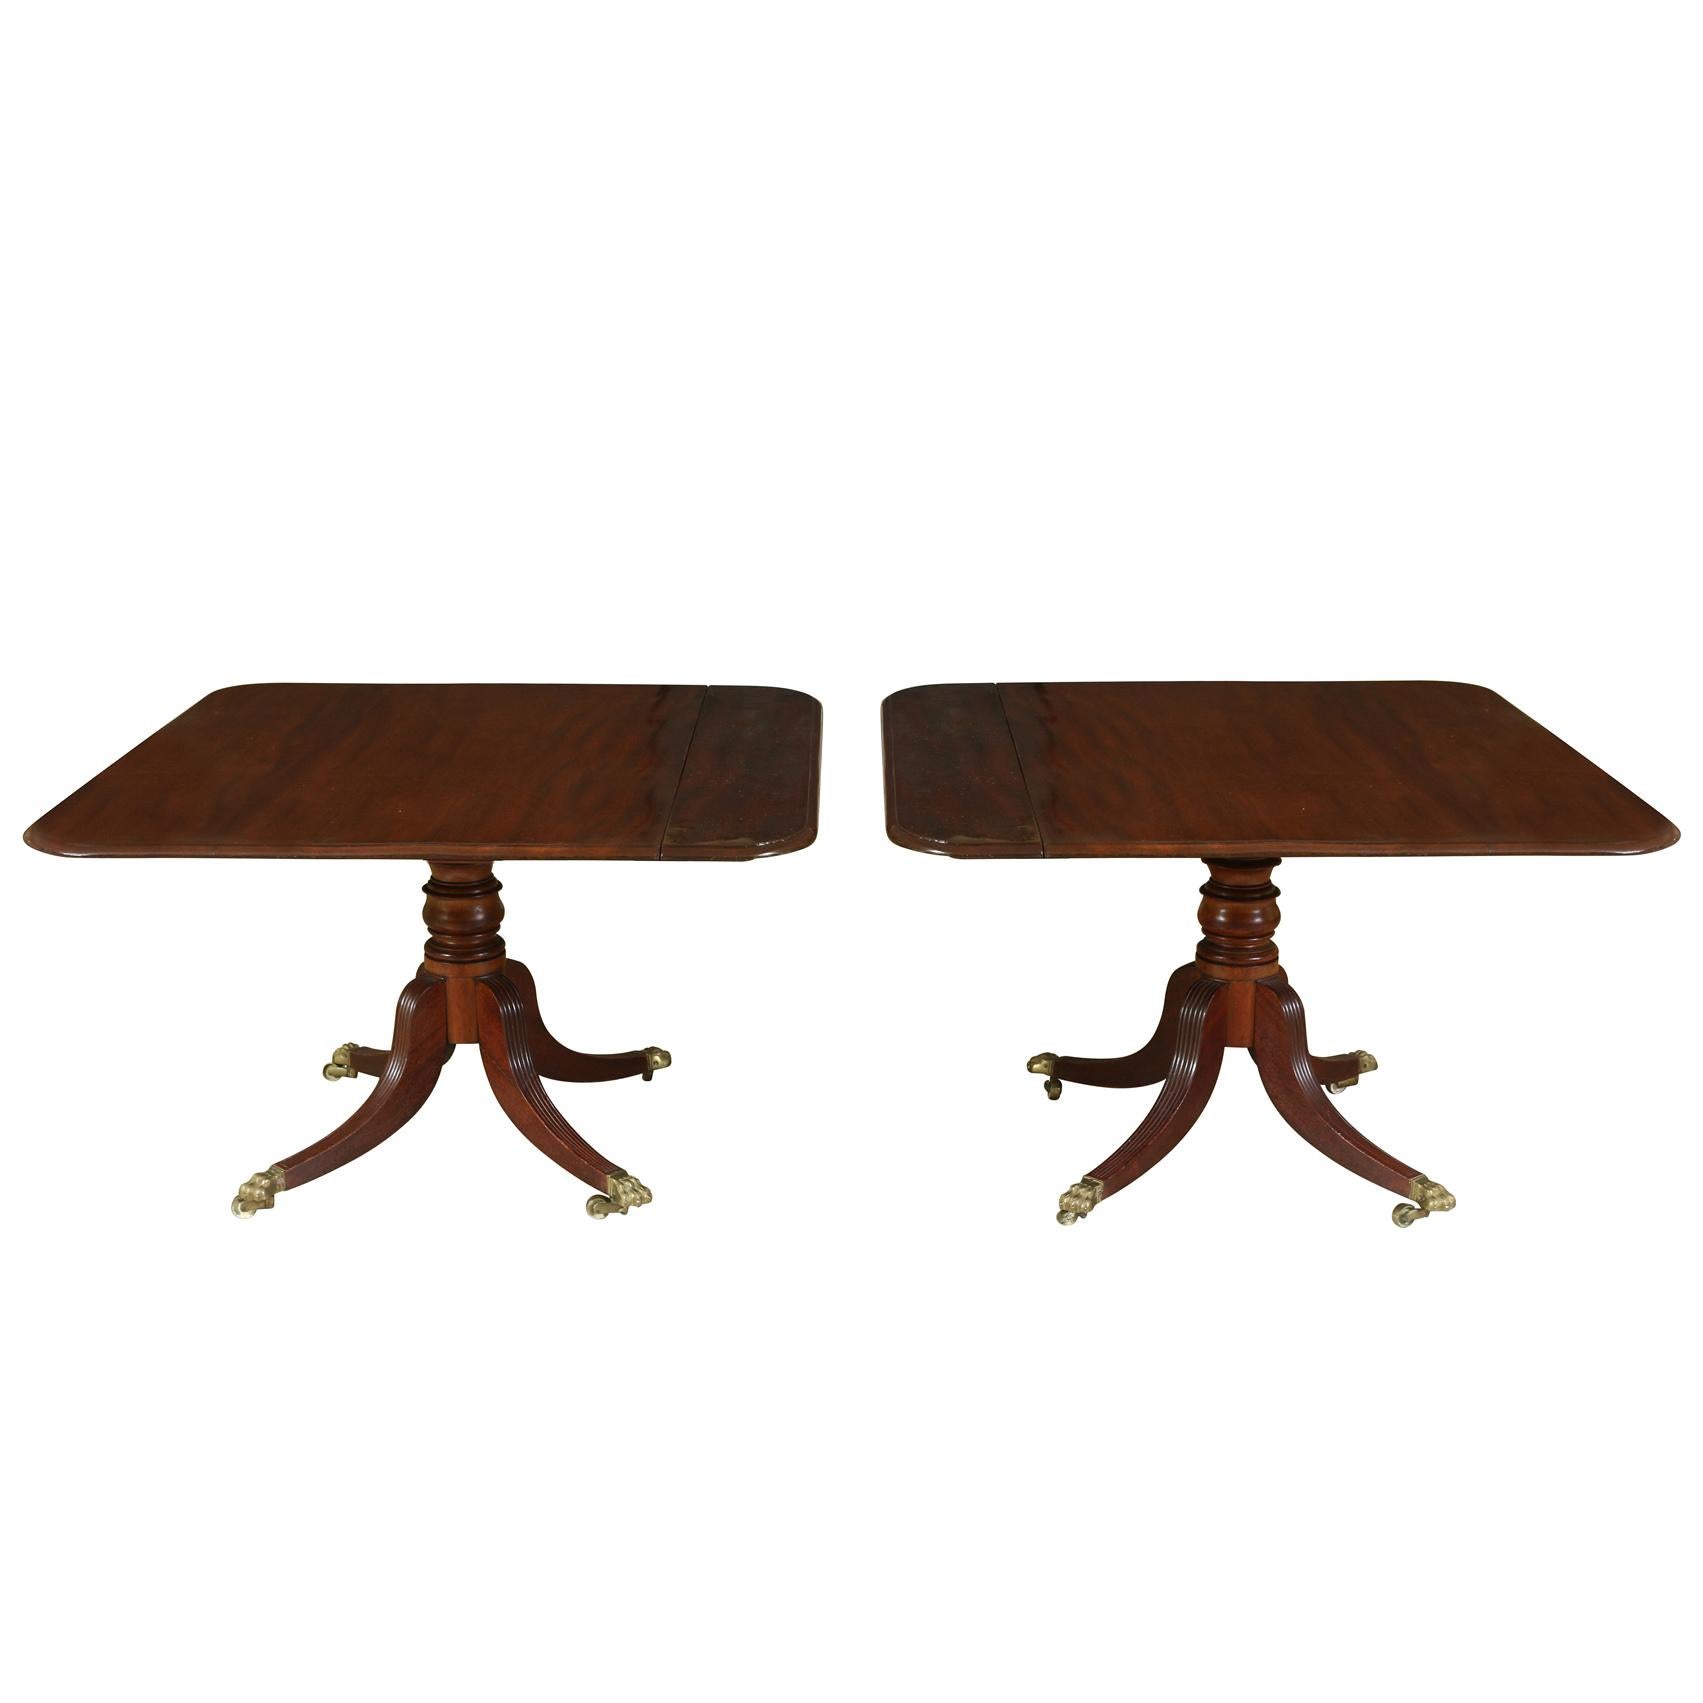 Double Pedestal Polished Mahogany Dining Table With Multiple Leaves For Sale 5